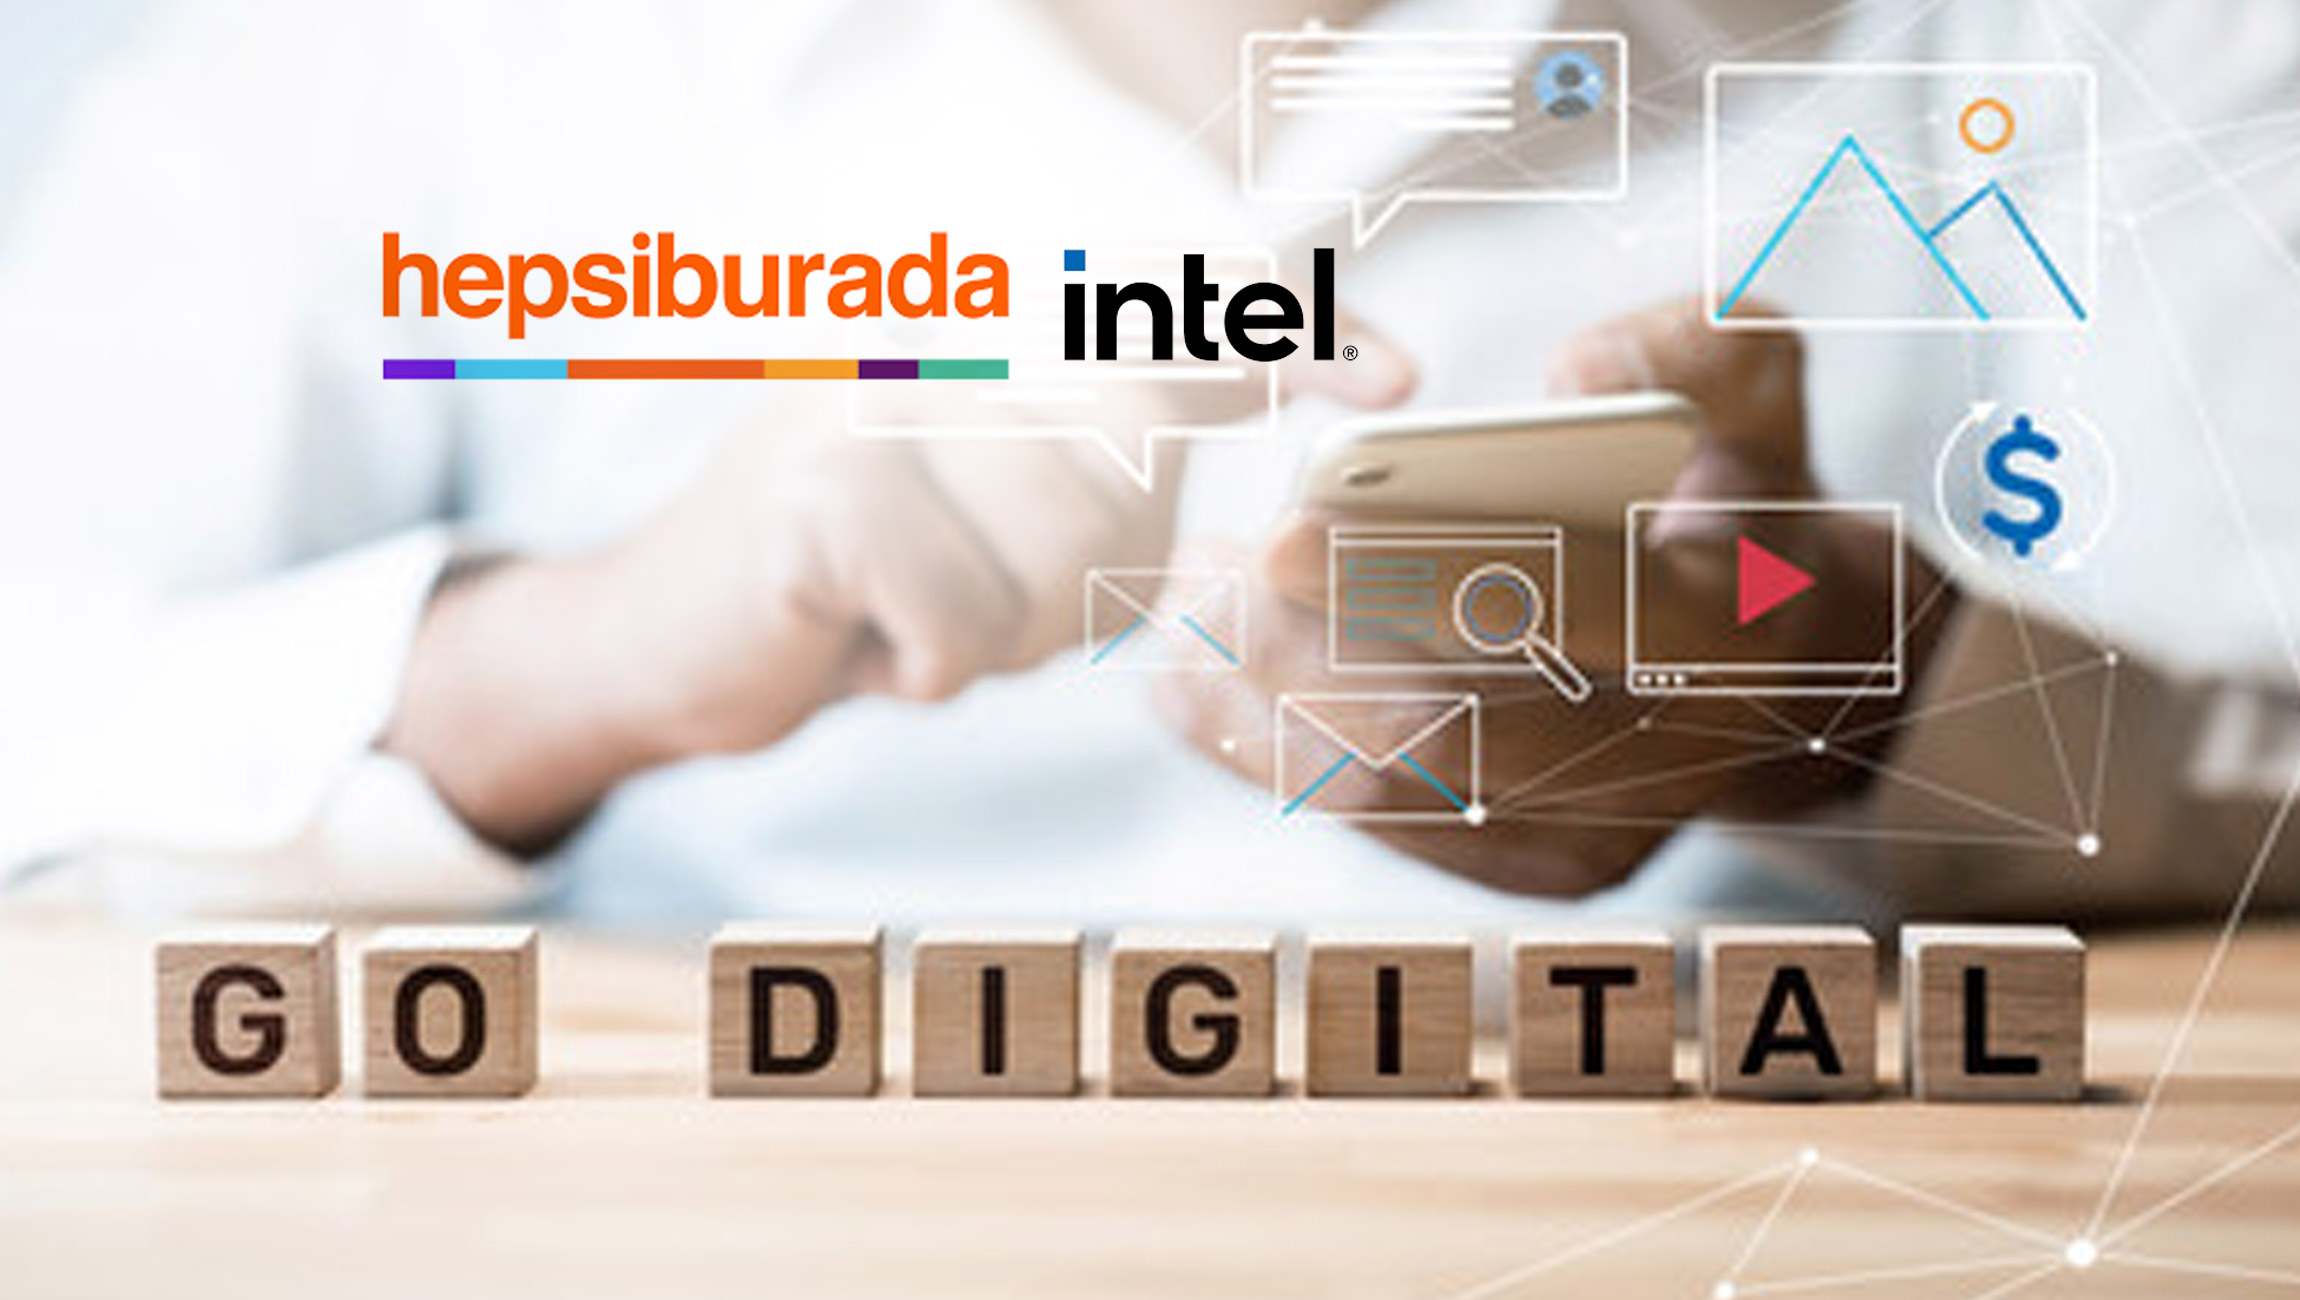 Hepsiburada-and-Intel-Join-Forces-to-help-SMEs-go-digital